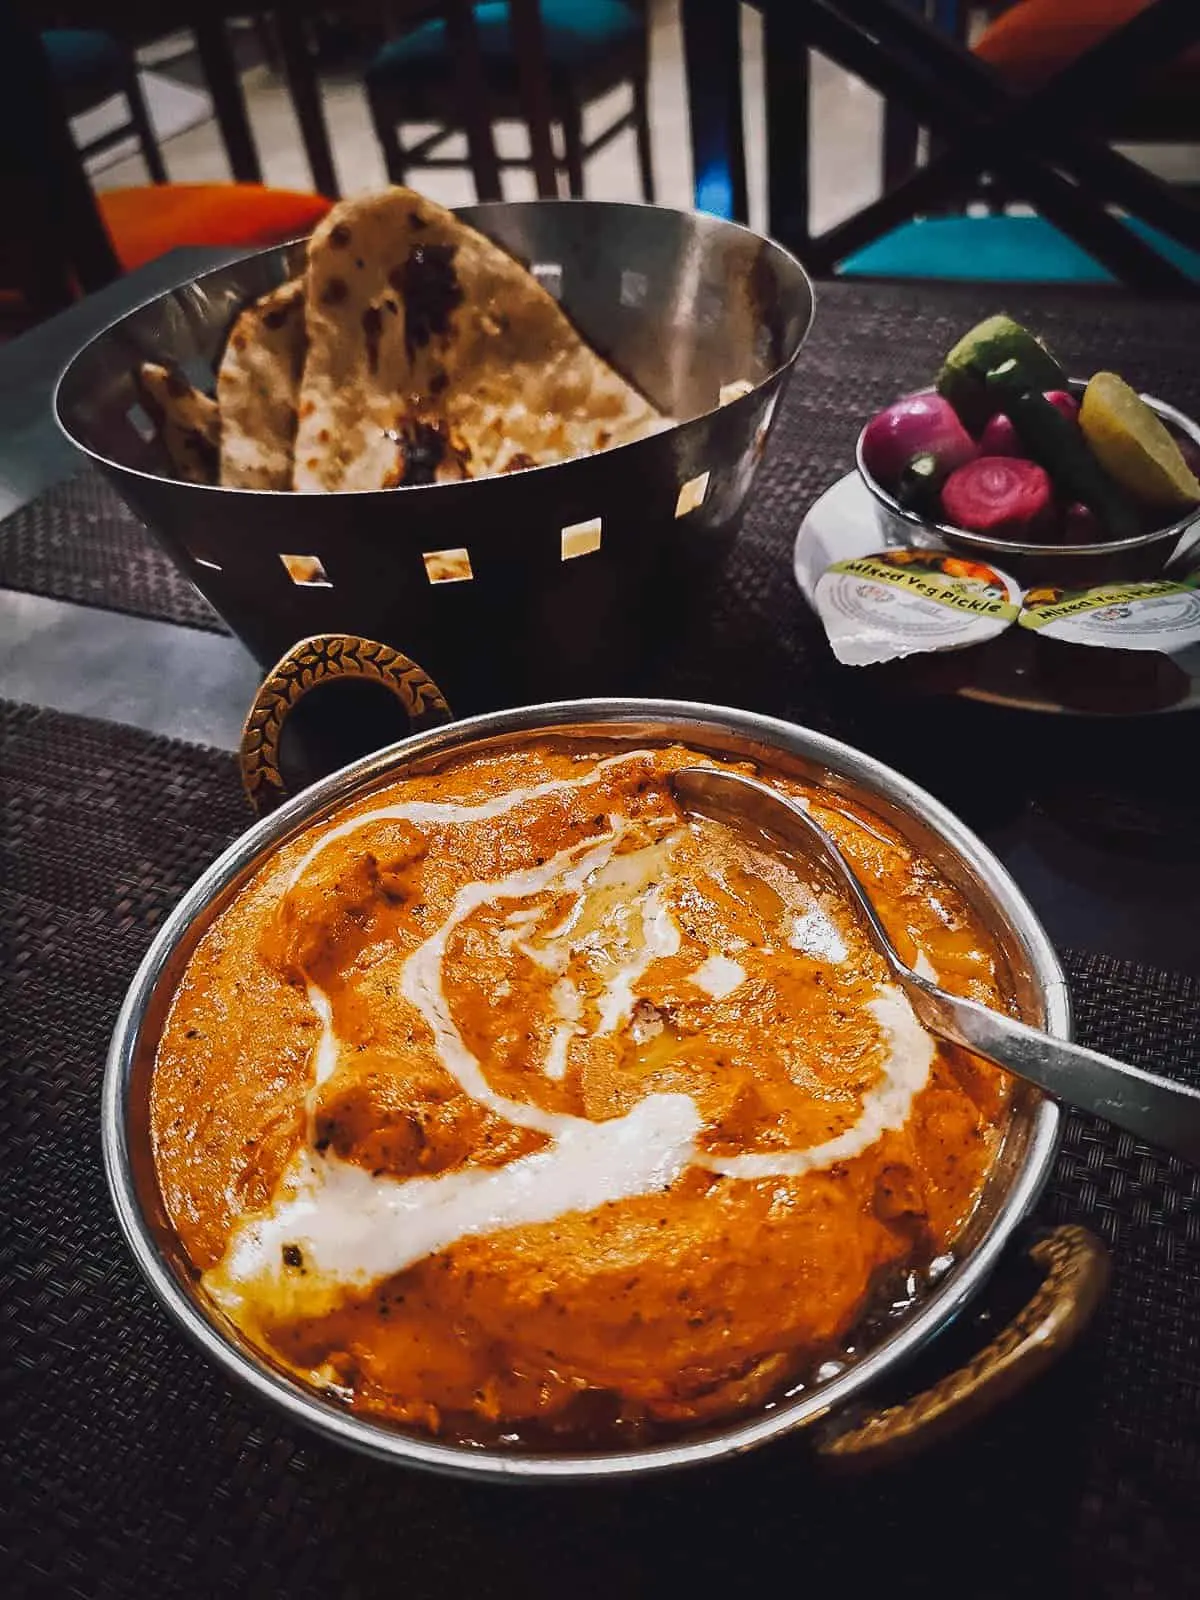 Butter chicken and naan bread